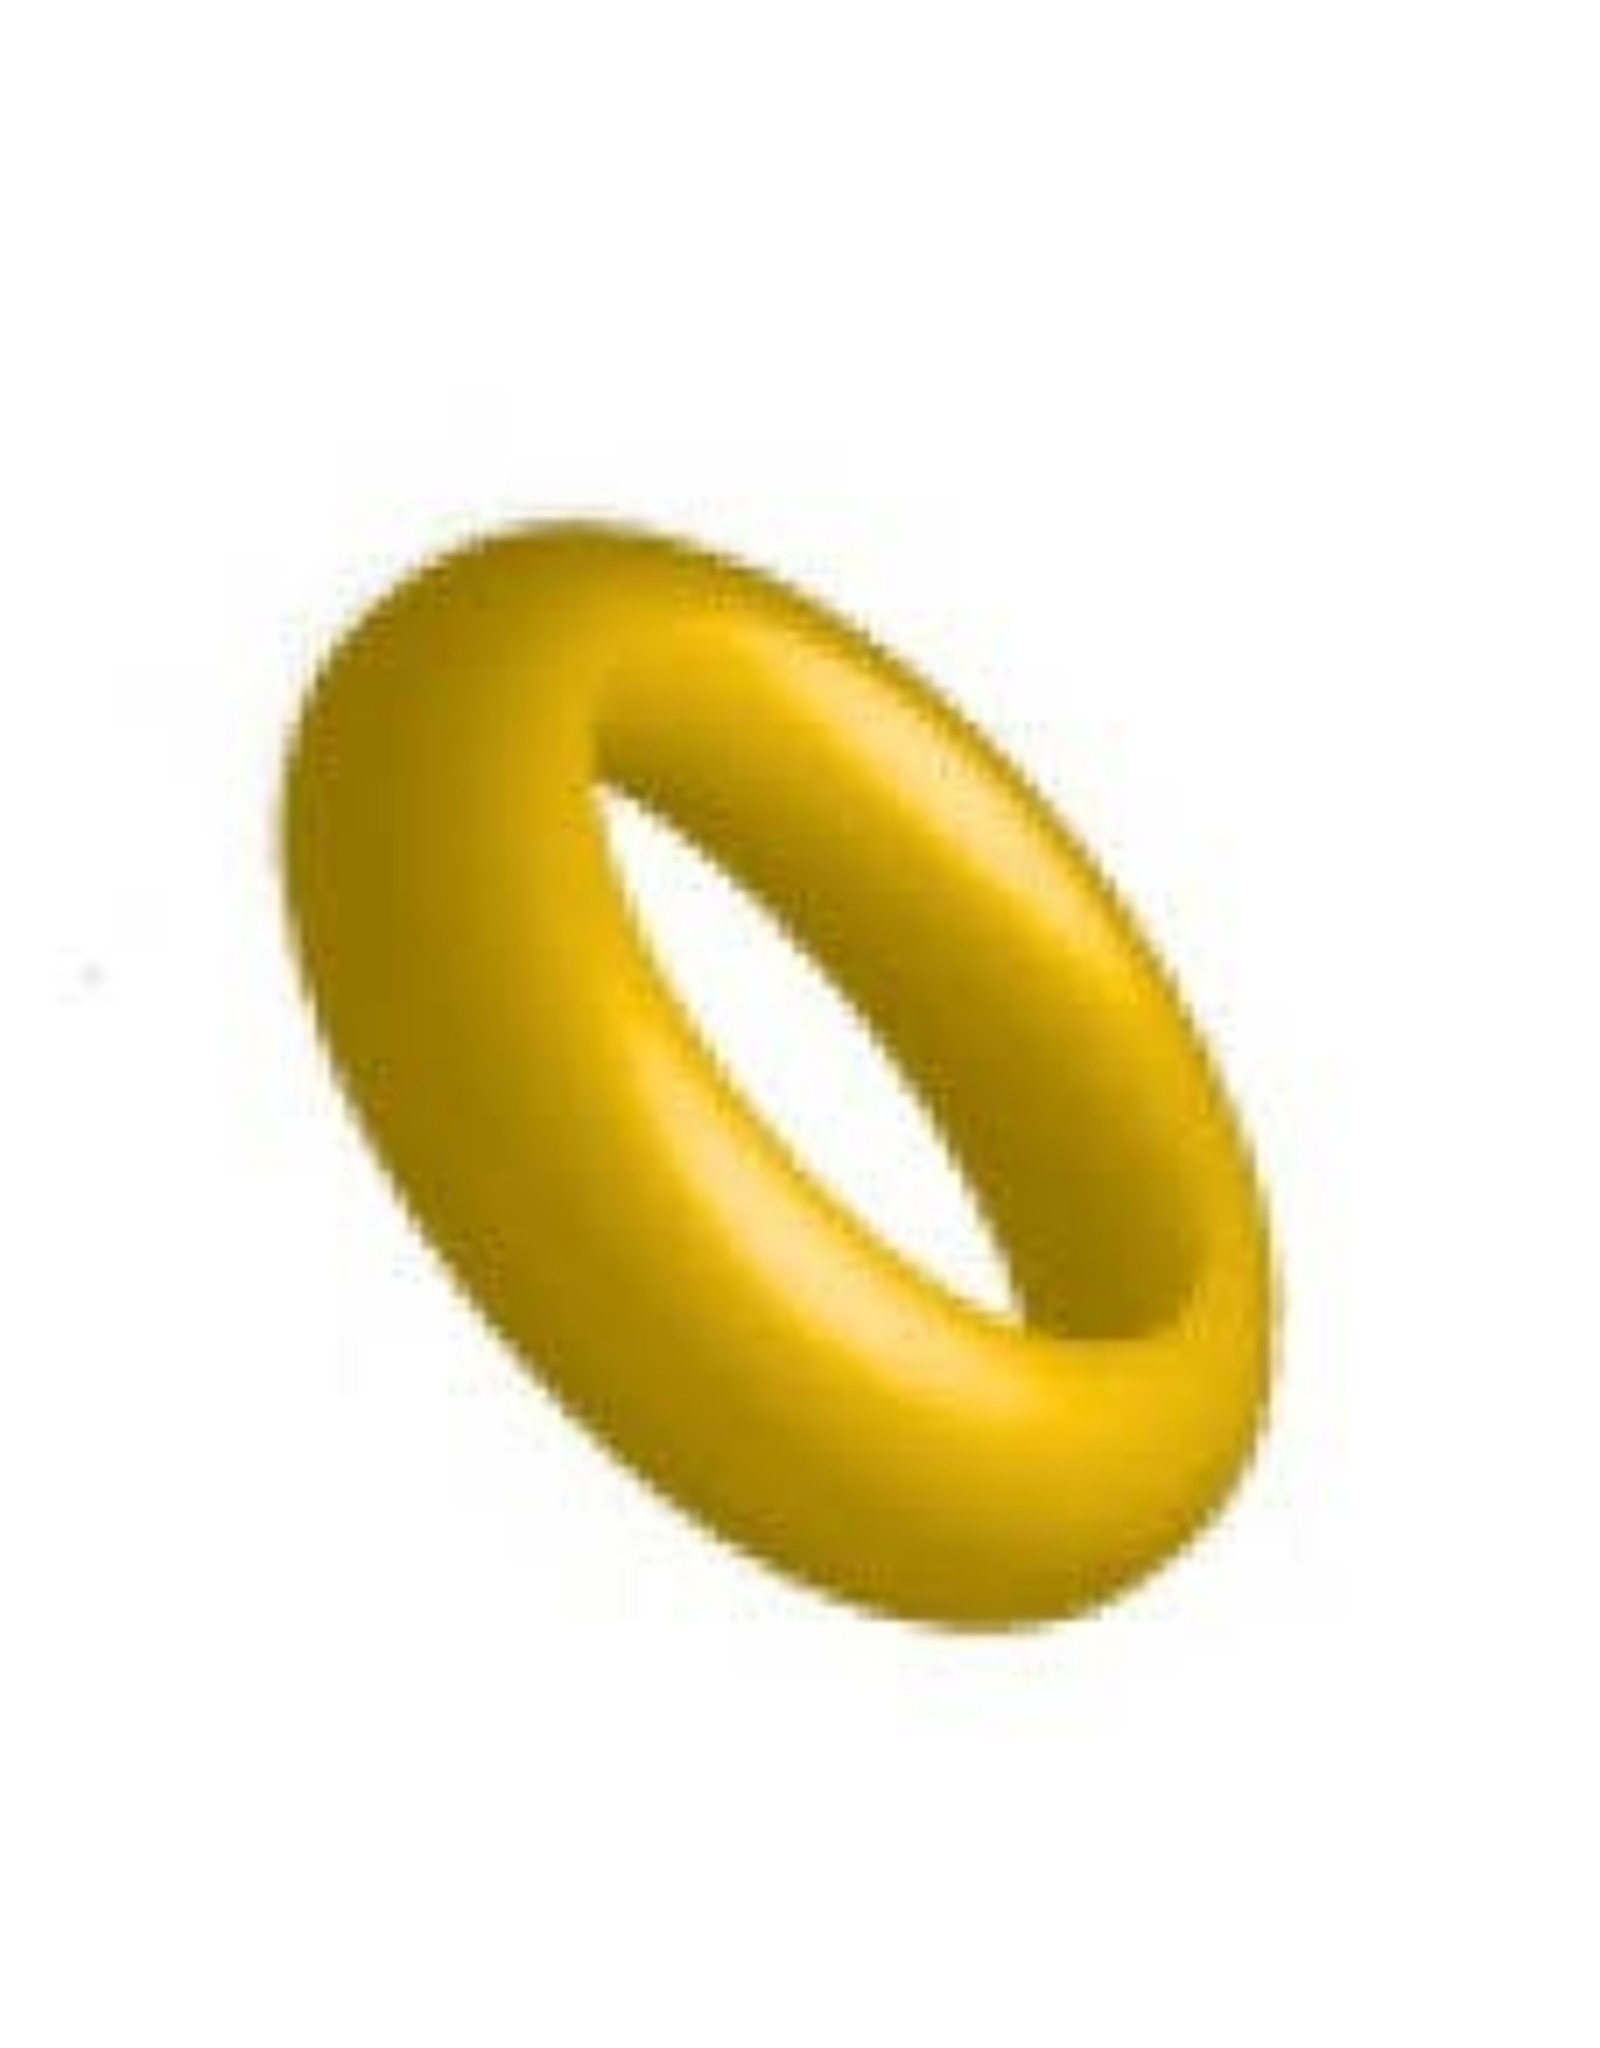 REPLACEMENT YELLOW STEM O-RINGS 10 PACK